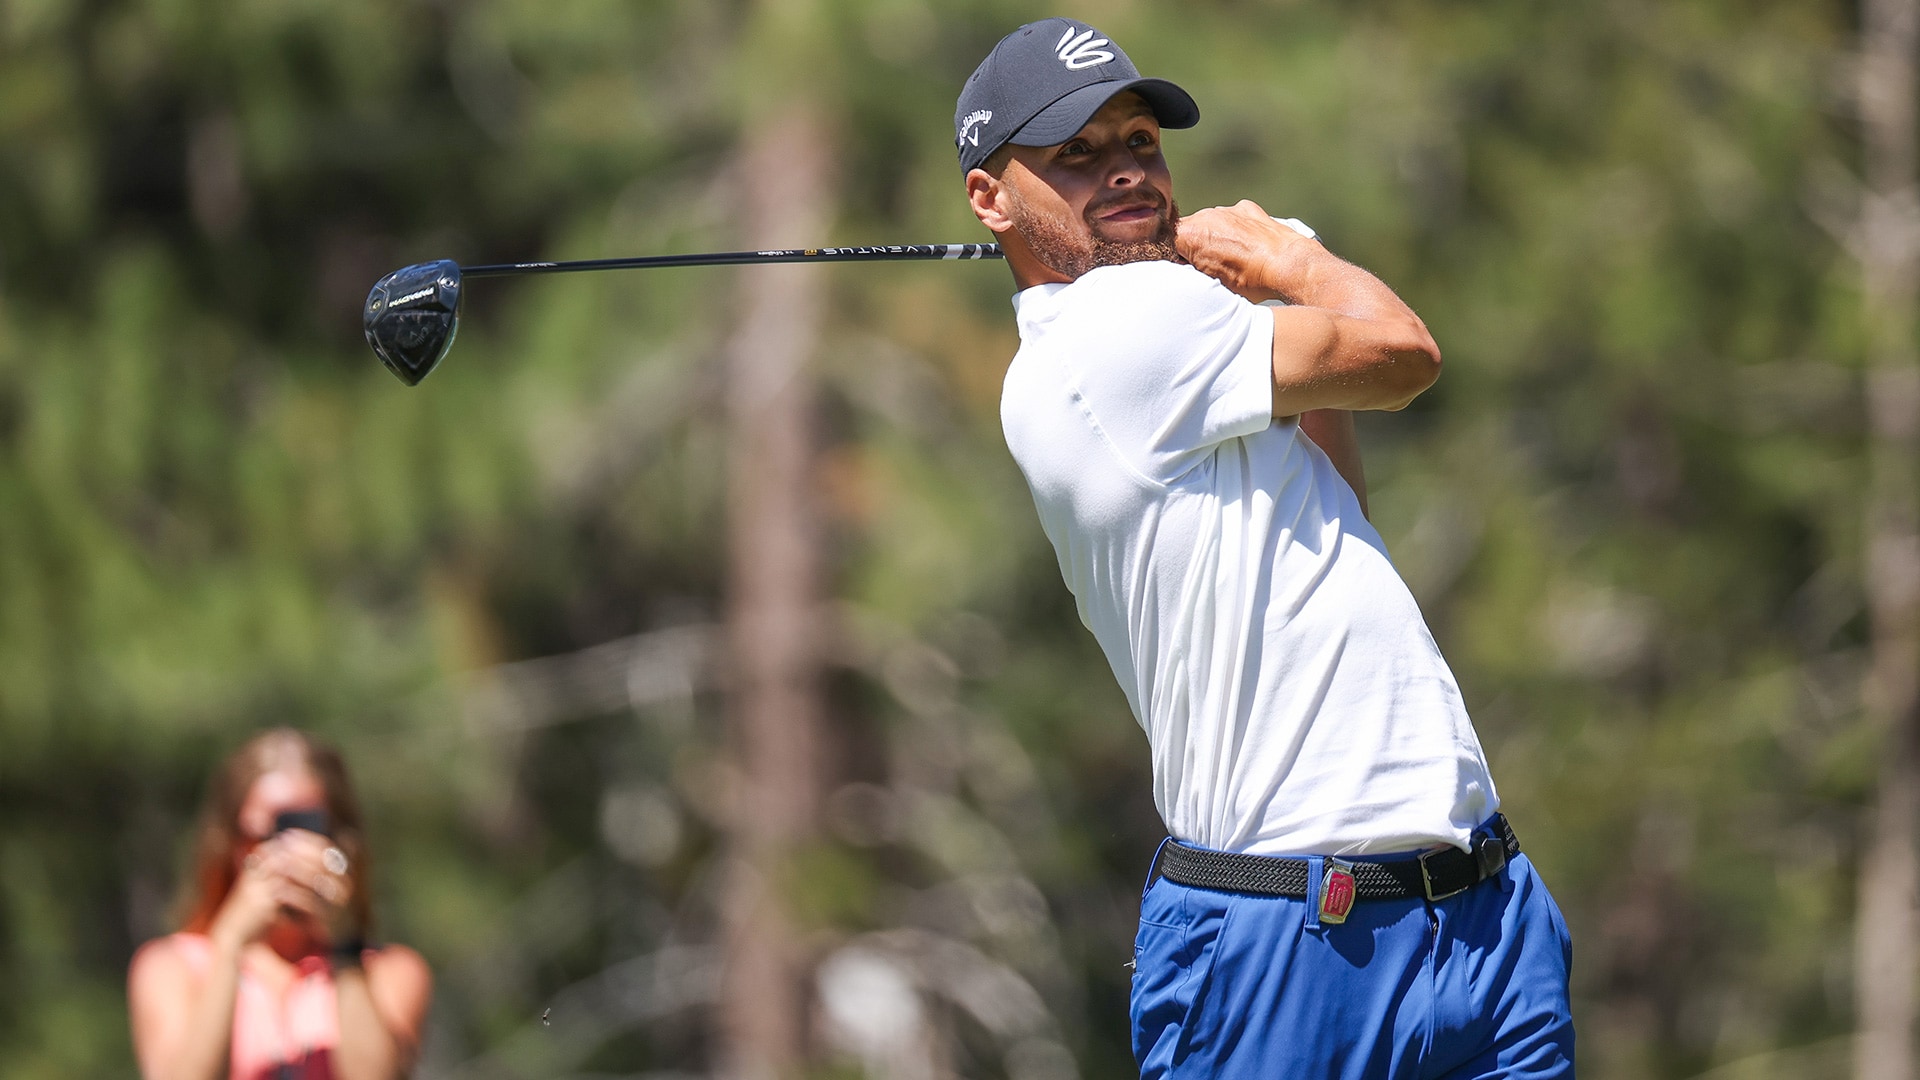 Stephen Curry leads American Century Championship celebrity event